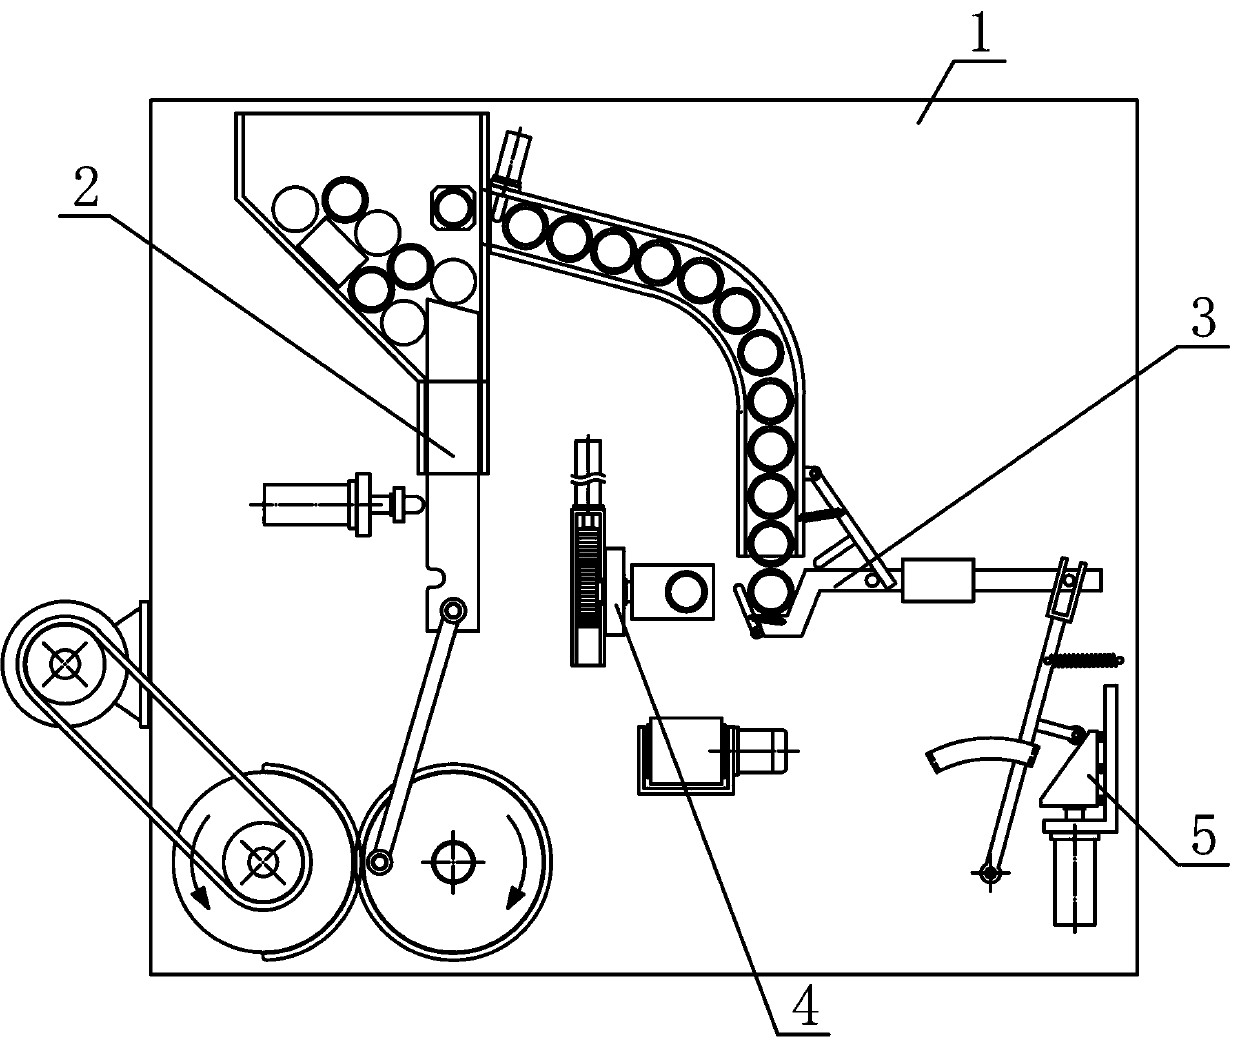 Feeding and transferring mechanism for pipe fittings with end portions closed